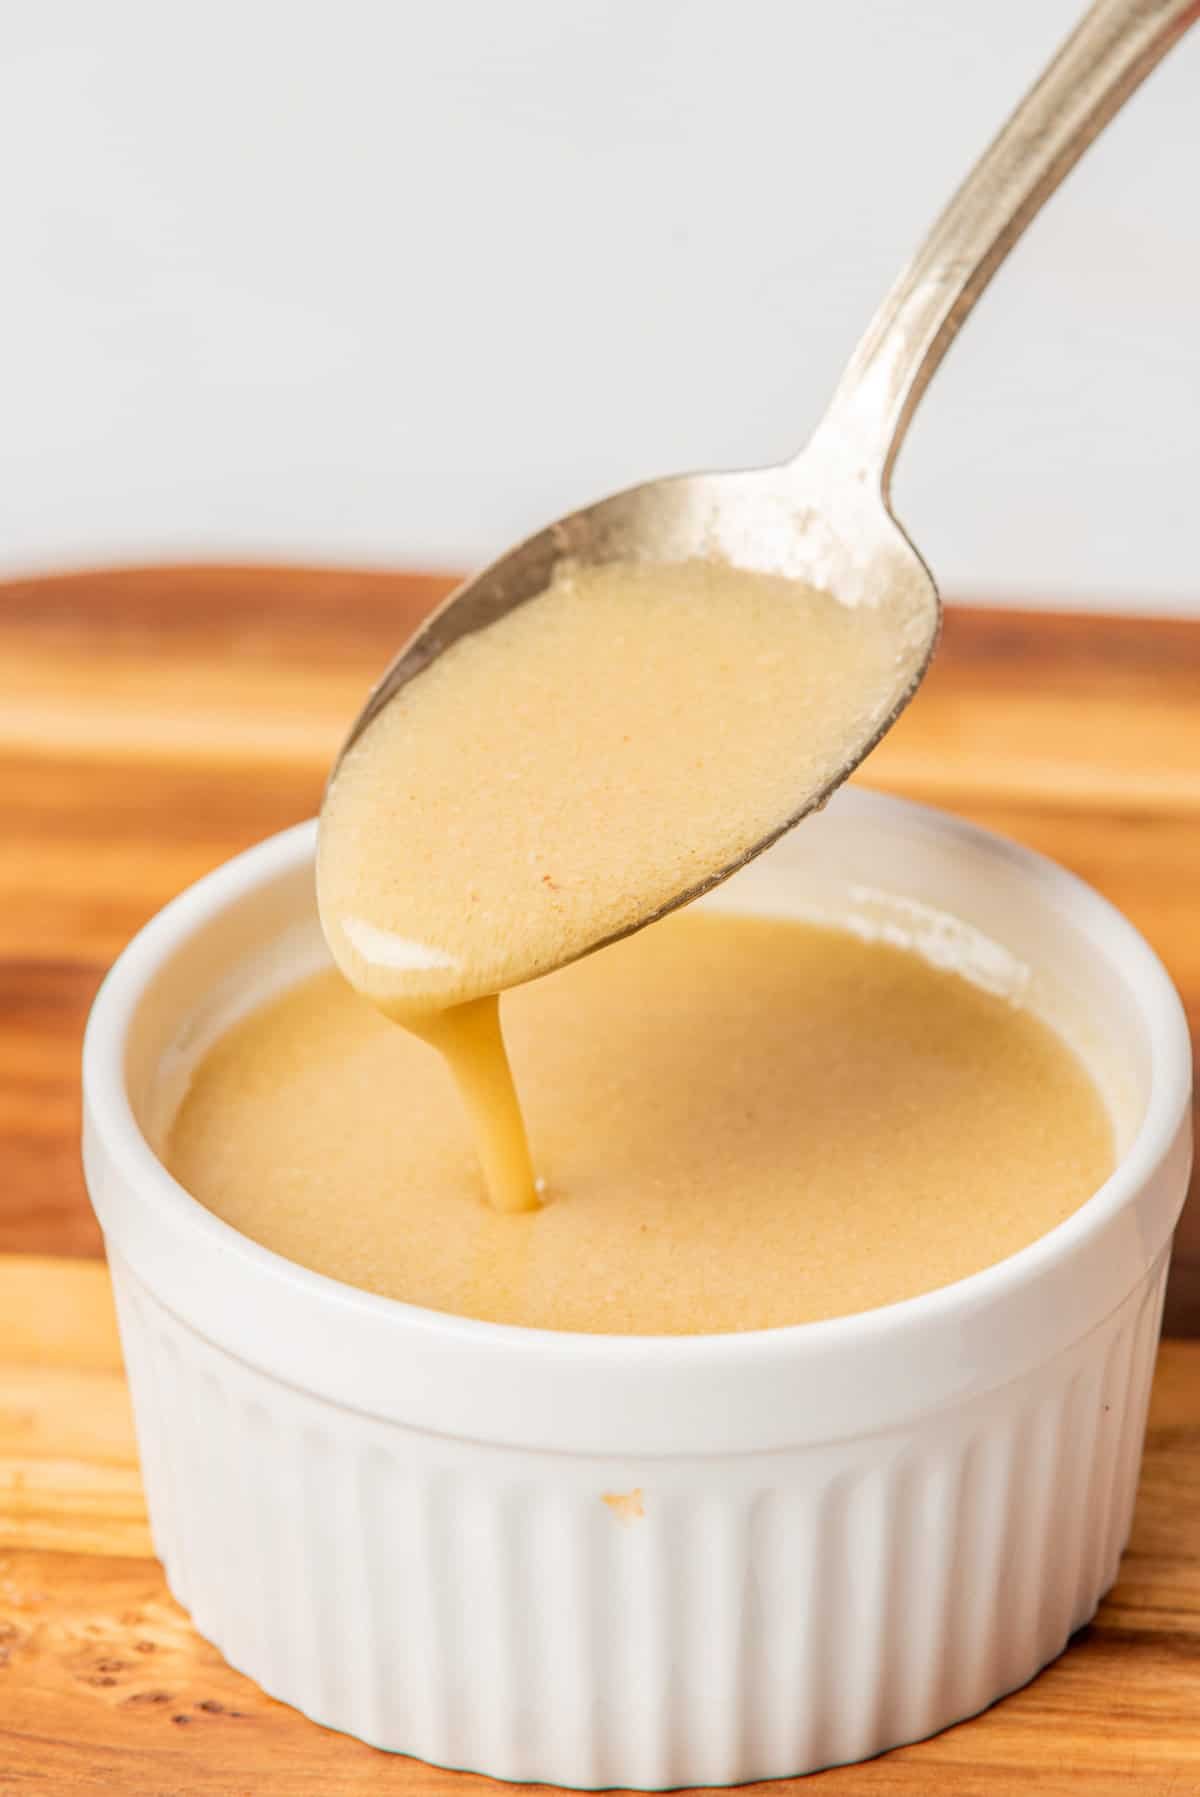 An image of champagne vinaigrette dressing in a ramekin bowl with a spoon.